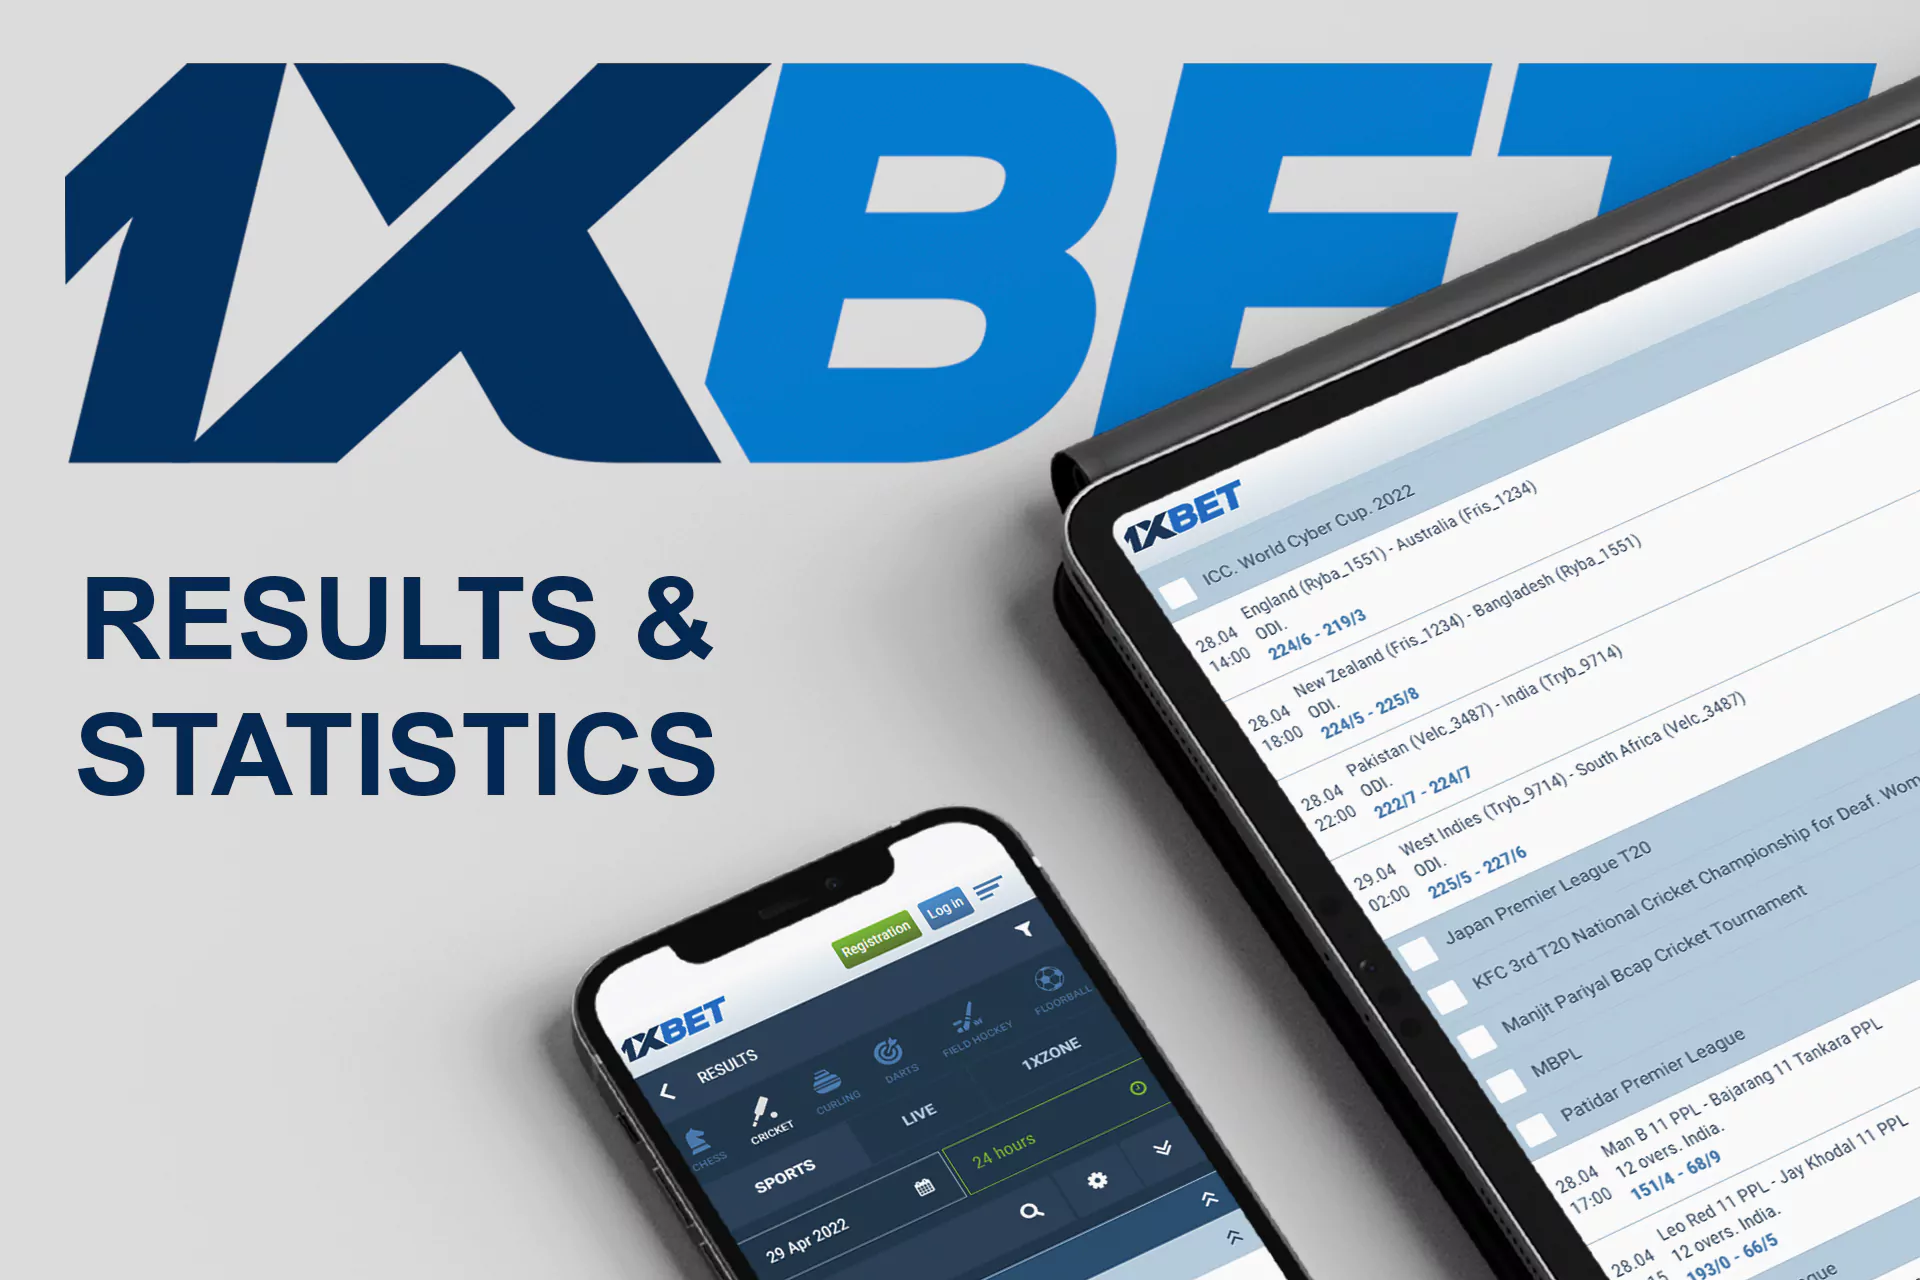 1xBet users from India have access to competition results and betting statistics.